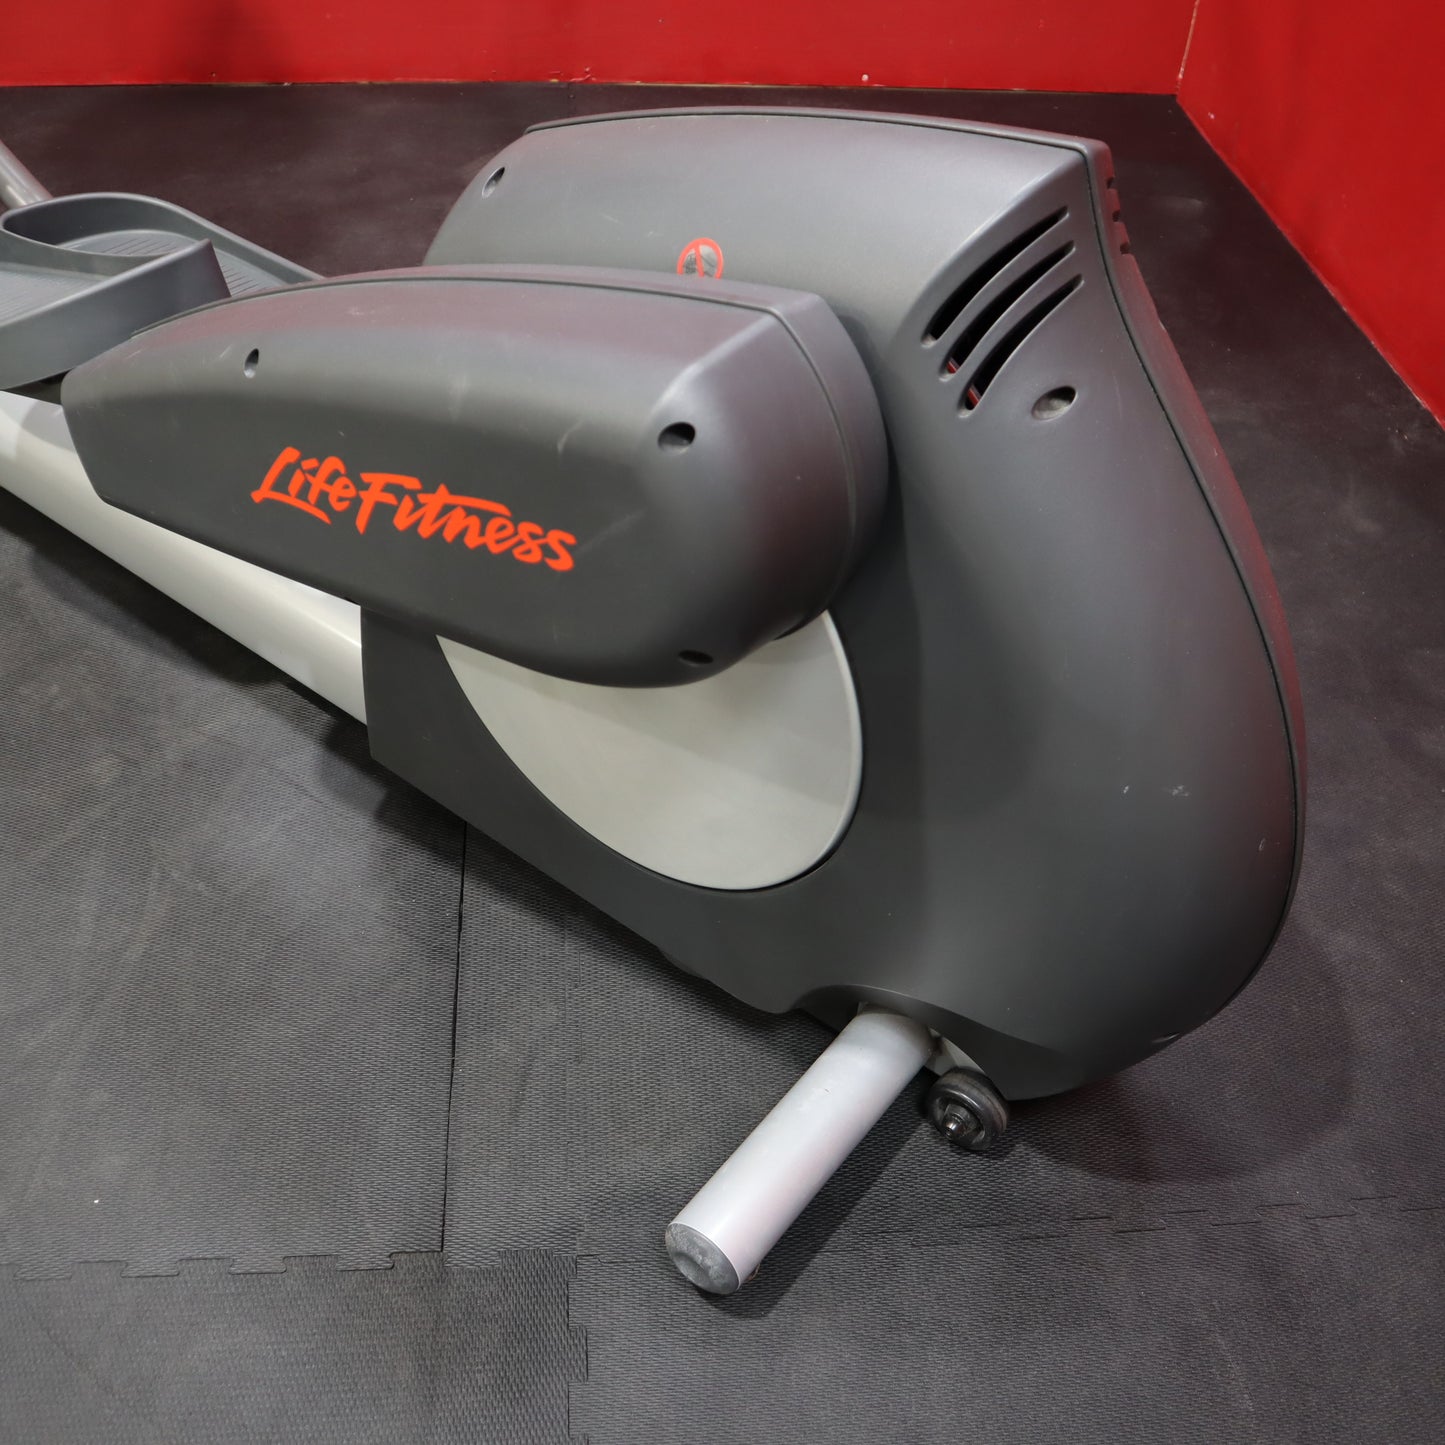 Life Fitness CLSX Integrity Series Elliptical Trainer (Used)